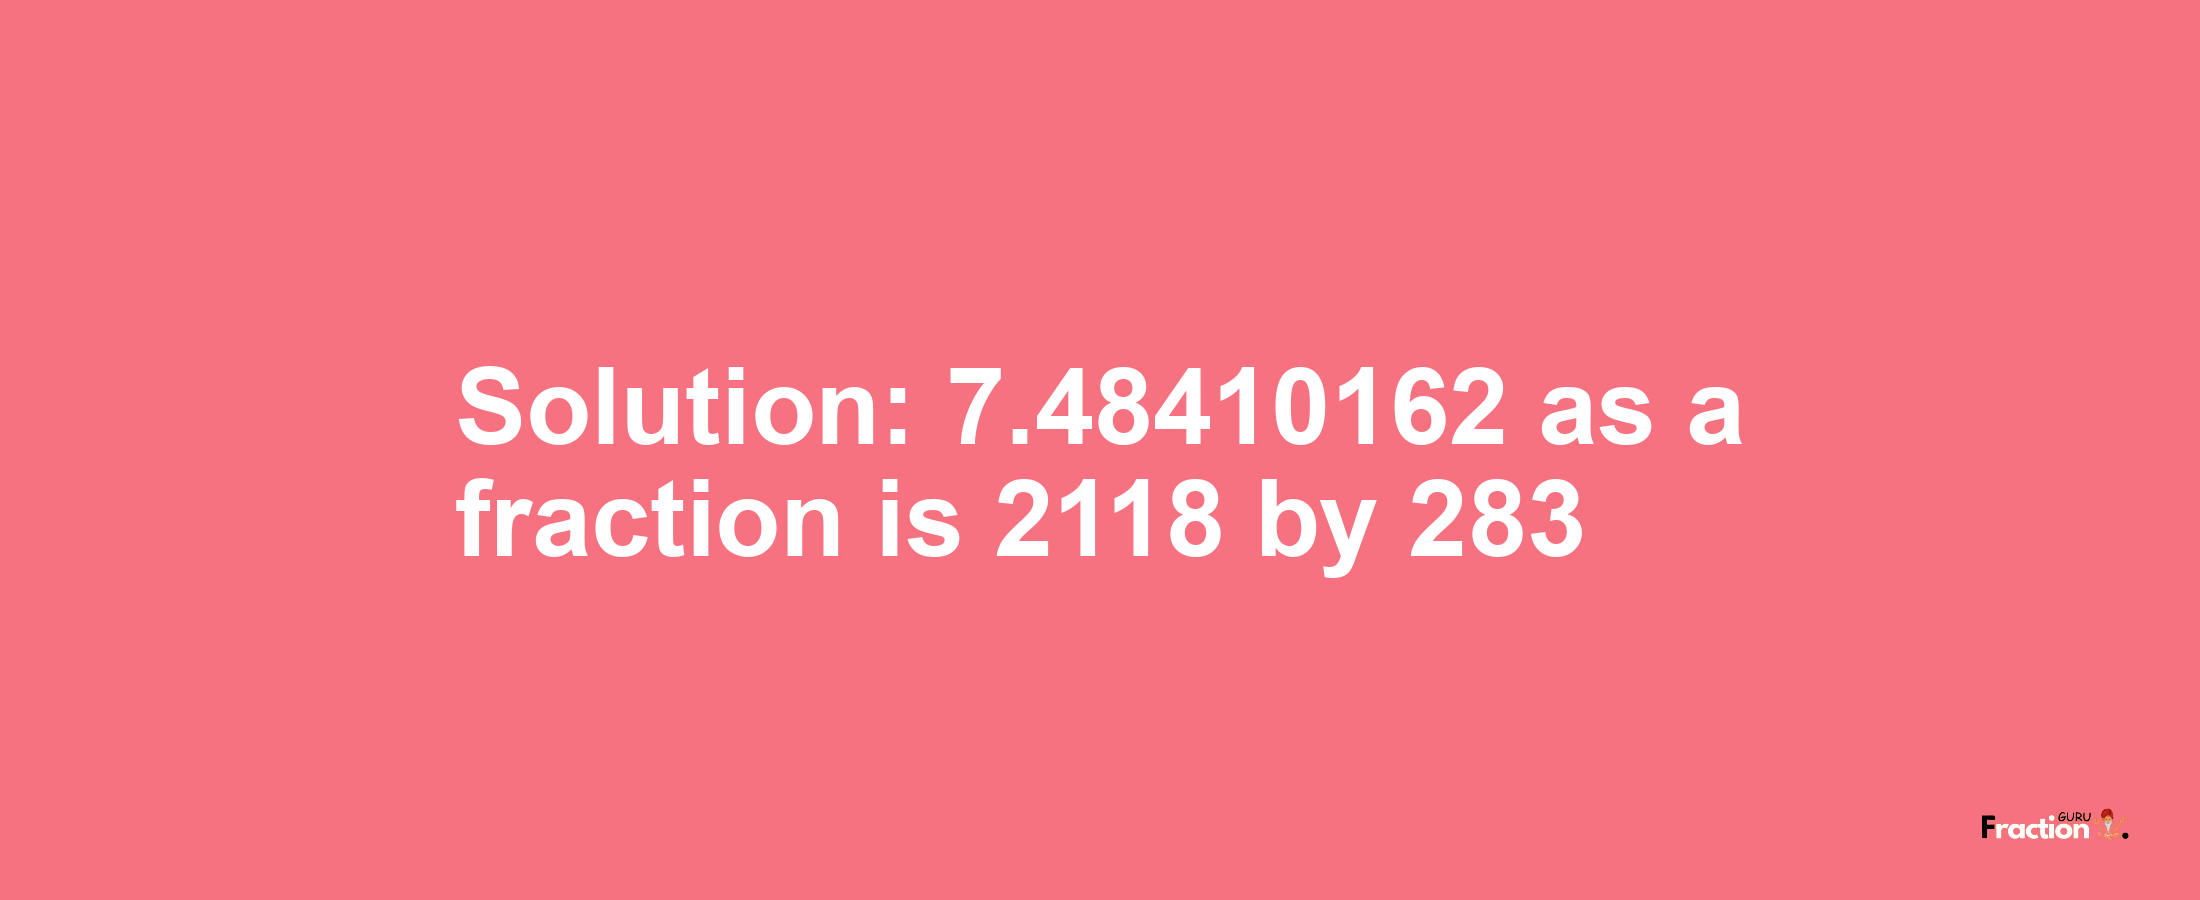 Solution:7.48410162 as a fraction is 2118/283